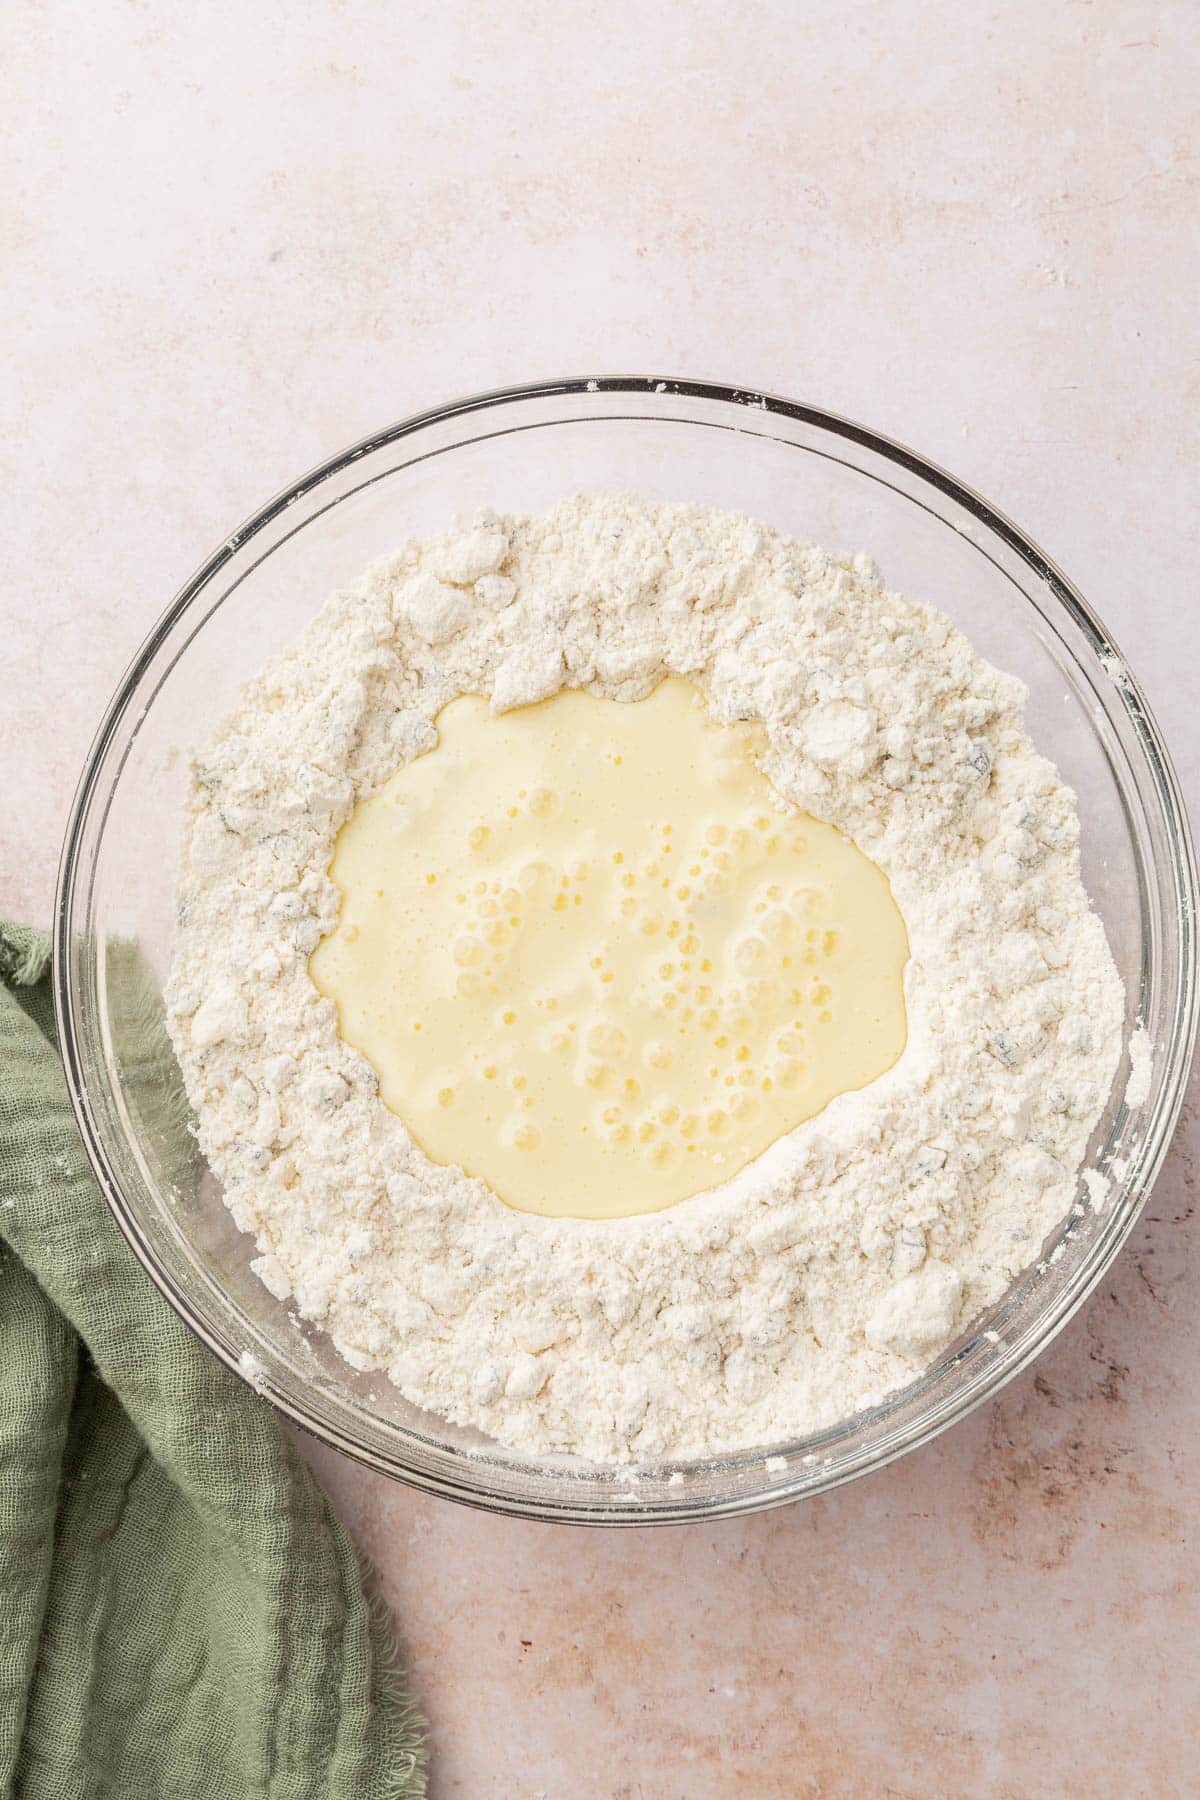 A glass mixing bowl with gluten-free flour blend mix with a buttermilk mixture in the center.